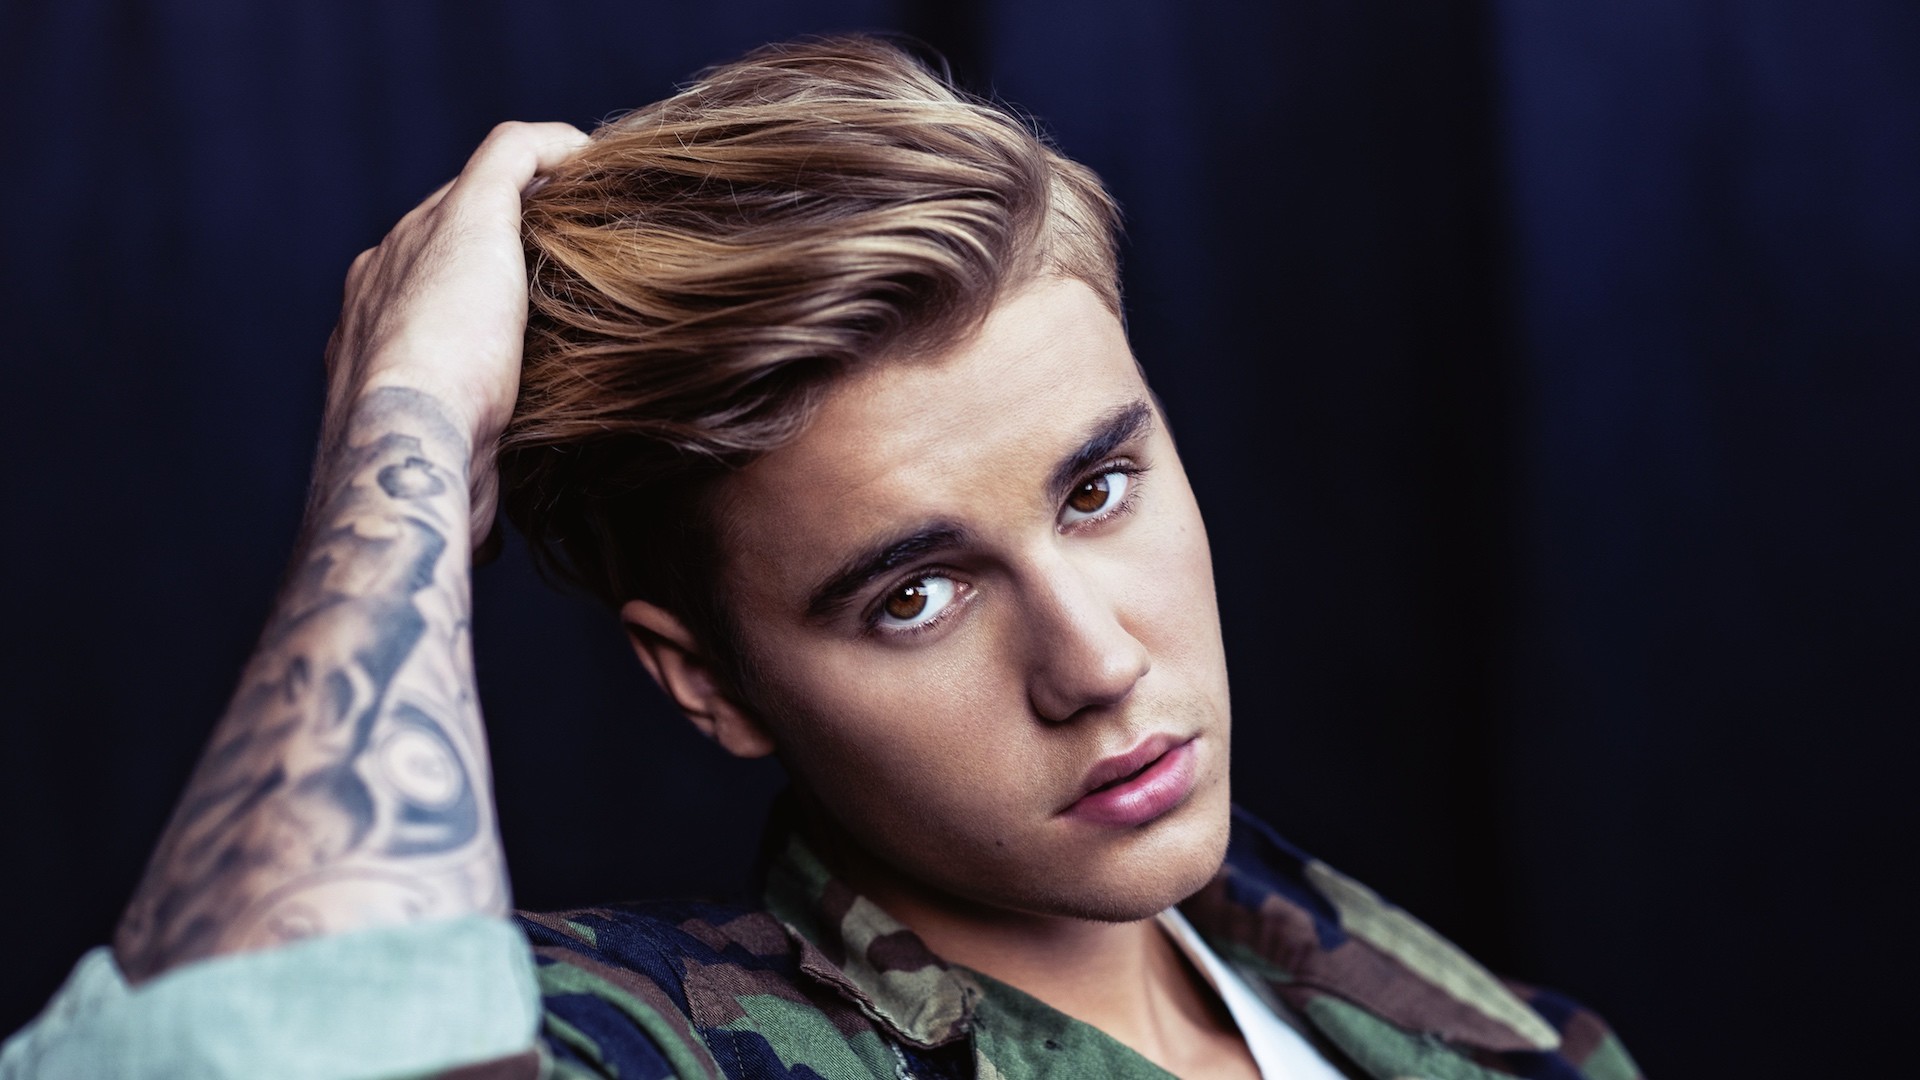 1920x1080 New Study Finds That Psychopaths Prefer Justin Bieber's Music - Music Feeds